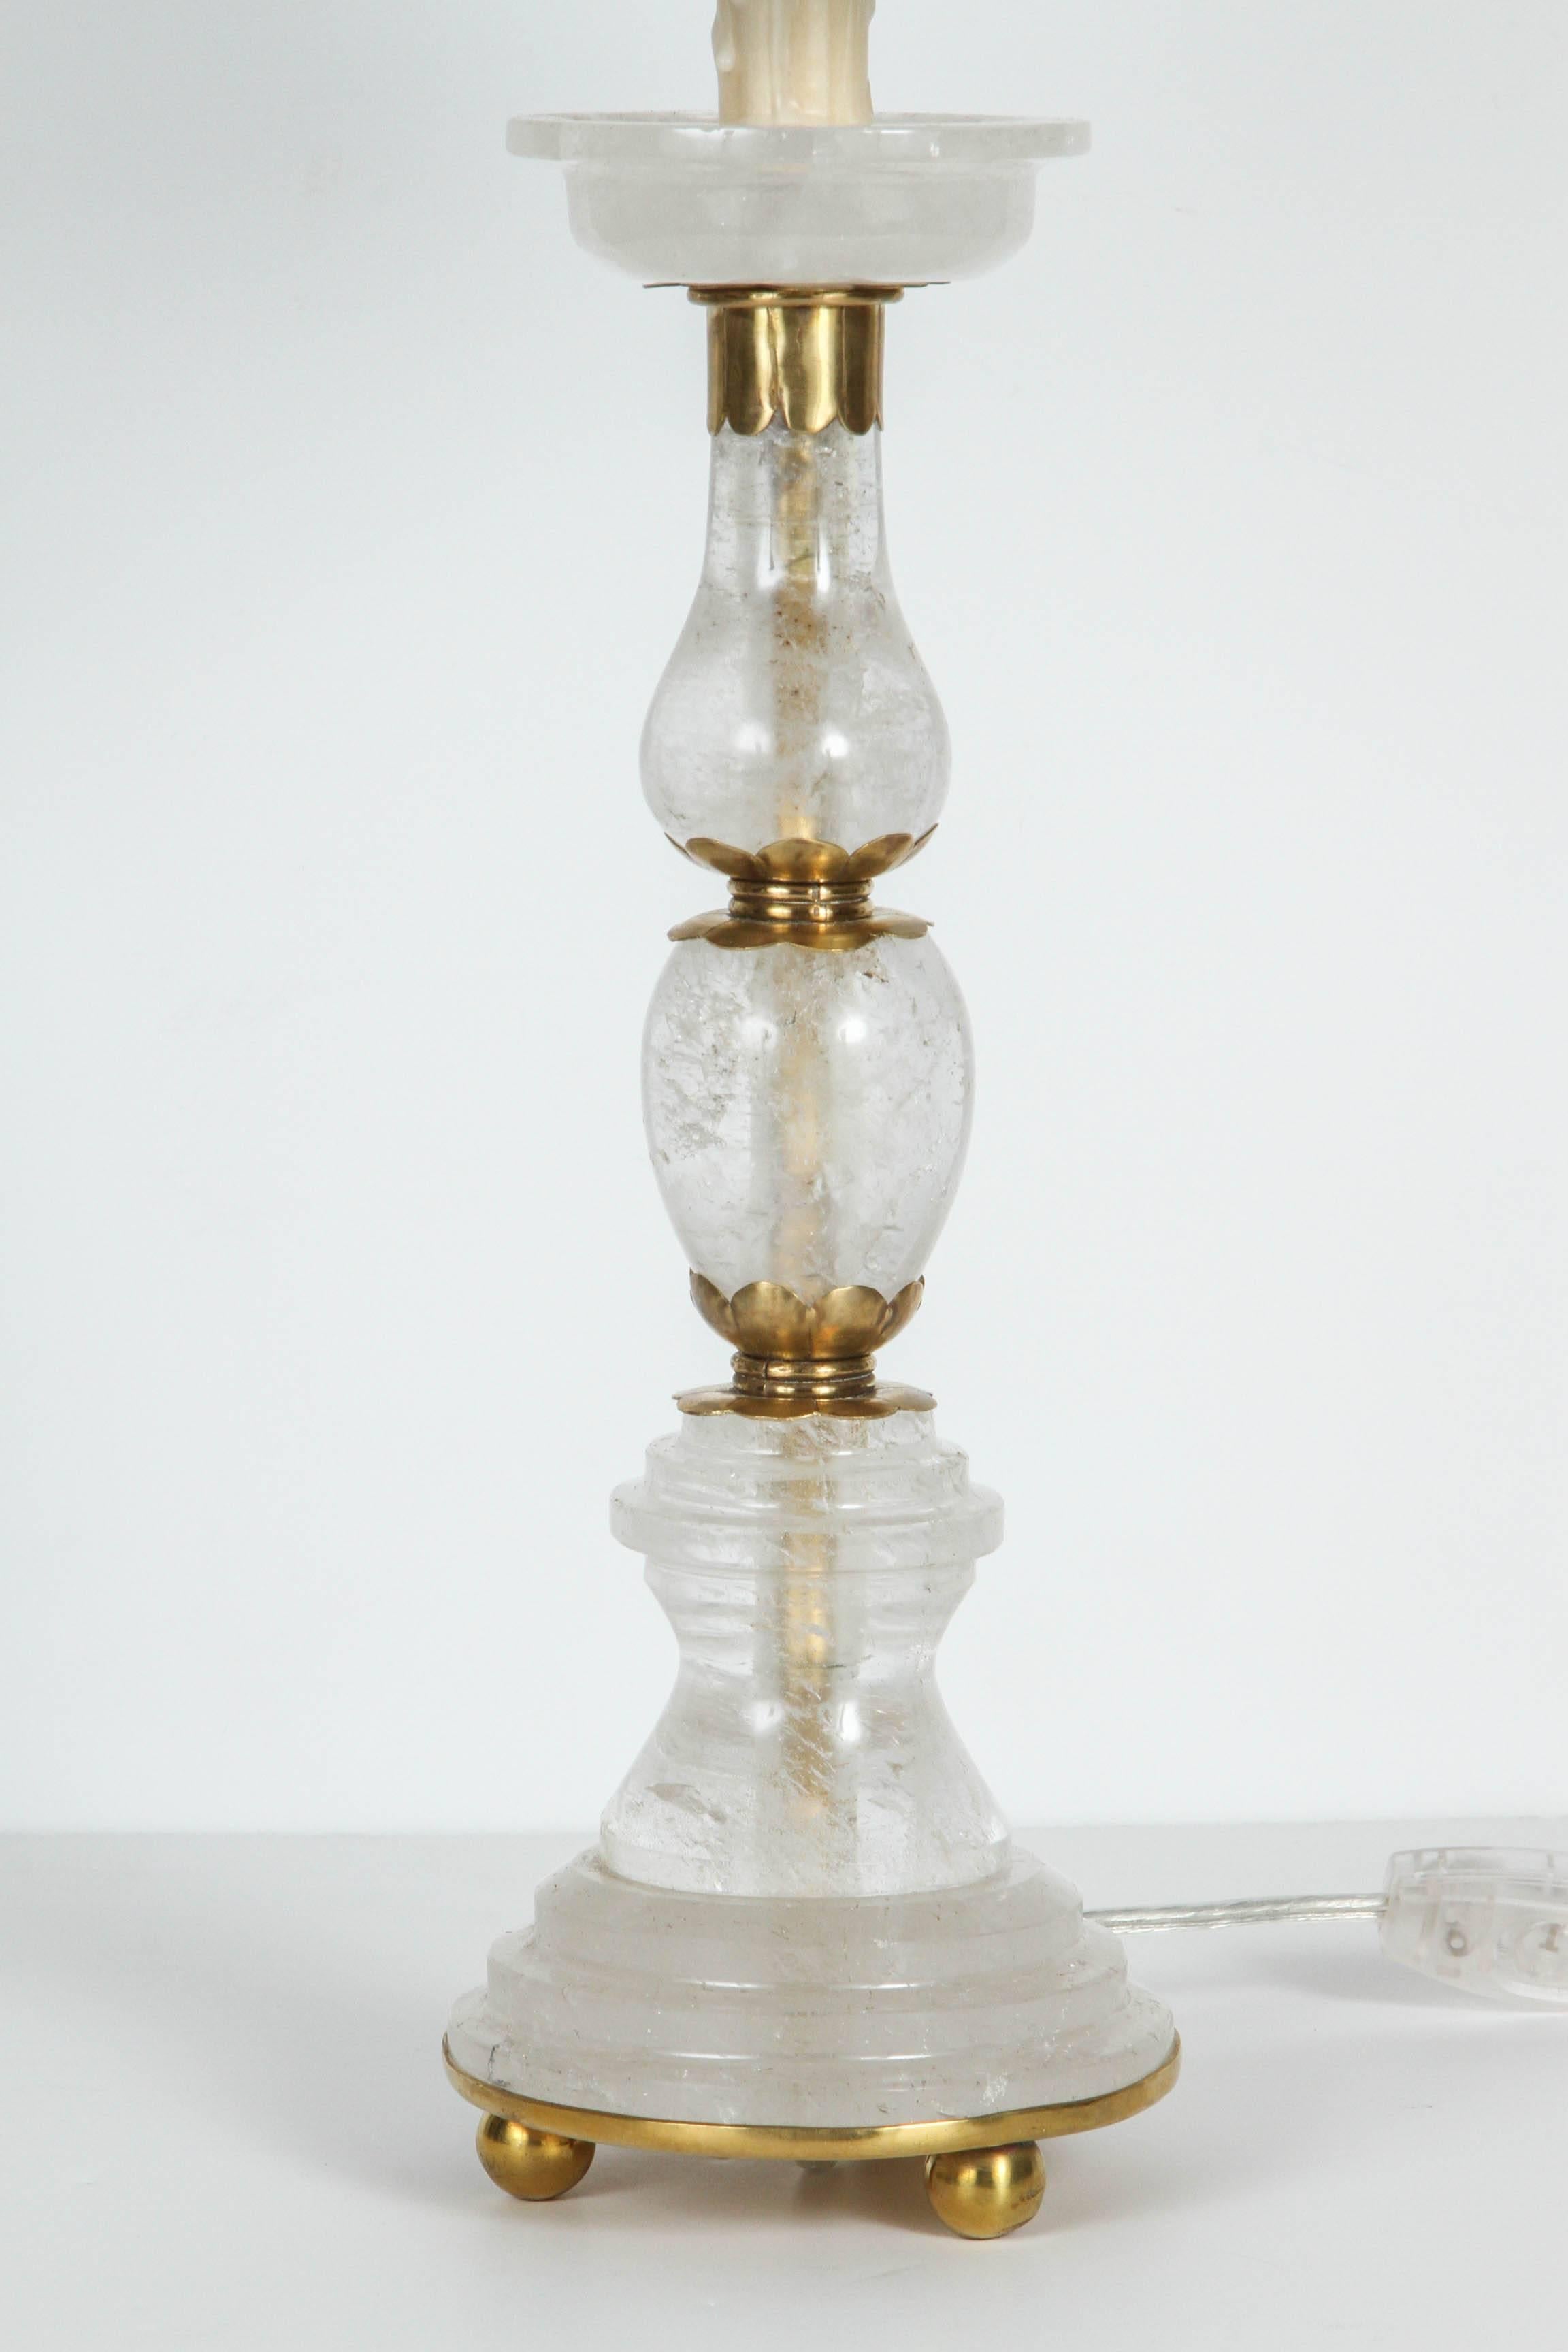 Brazilian Pair of Rock Crystal Lamps with Brass Fittings